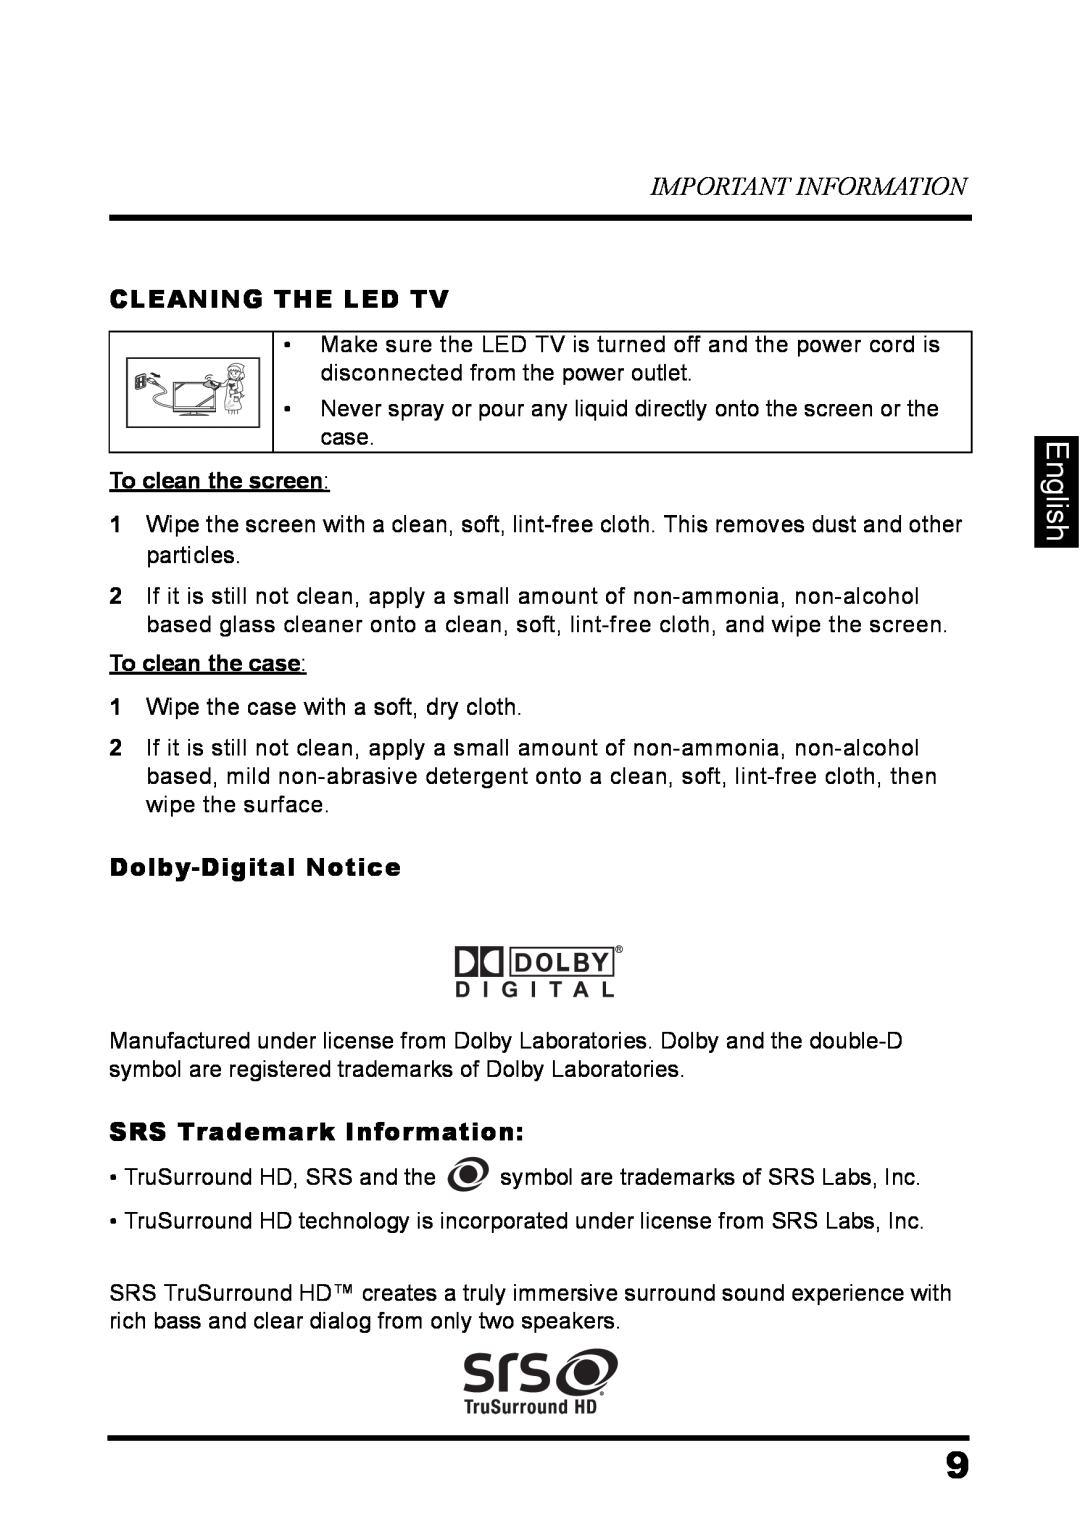 Westinghouse LD-3237 English, Important Information, Cleaning The Led Tv, Dolby-Digital Notice, SRS Trademark Information 